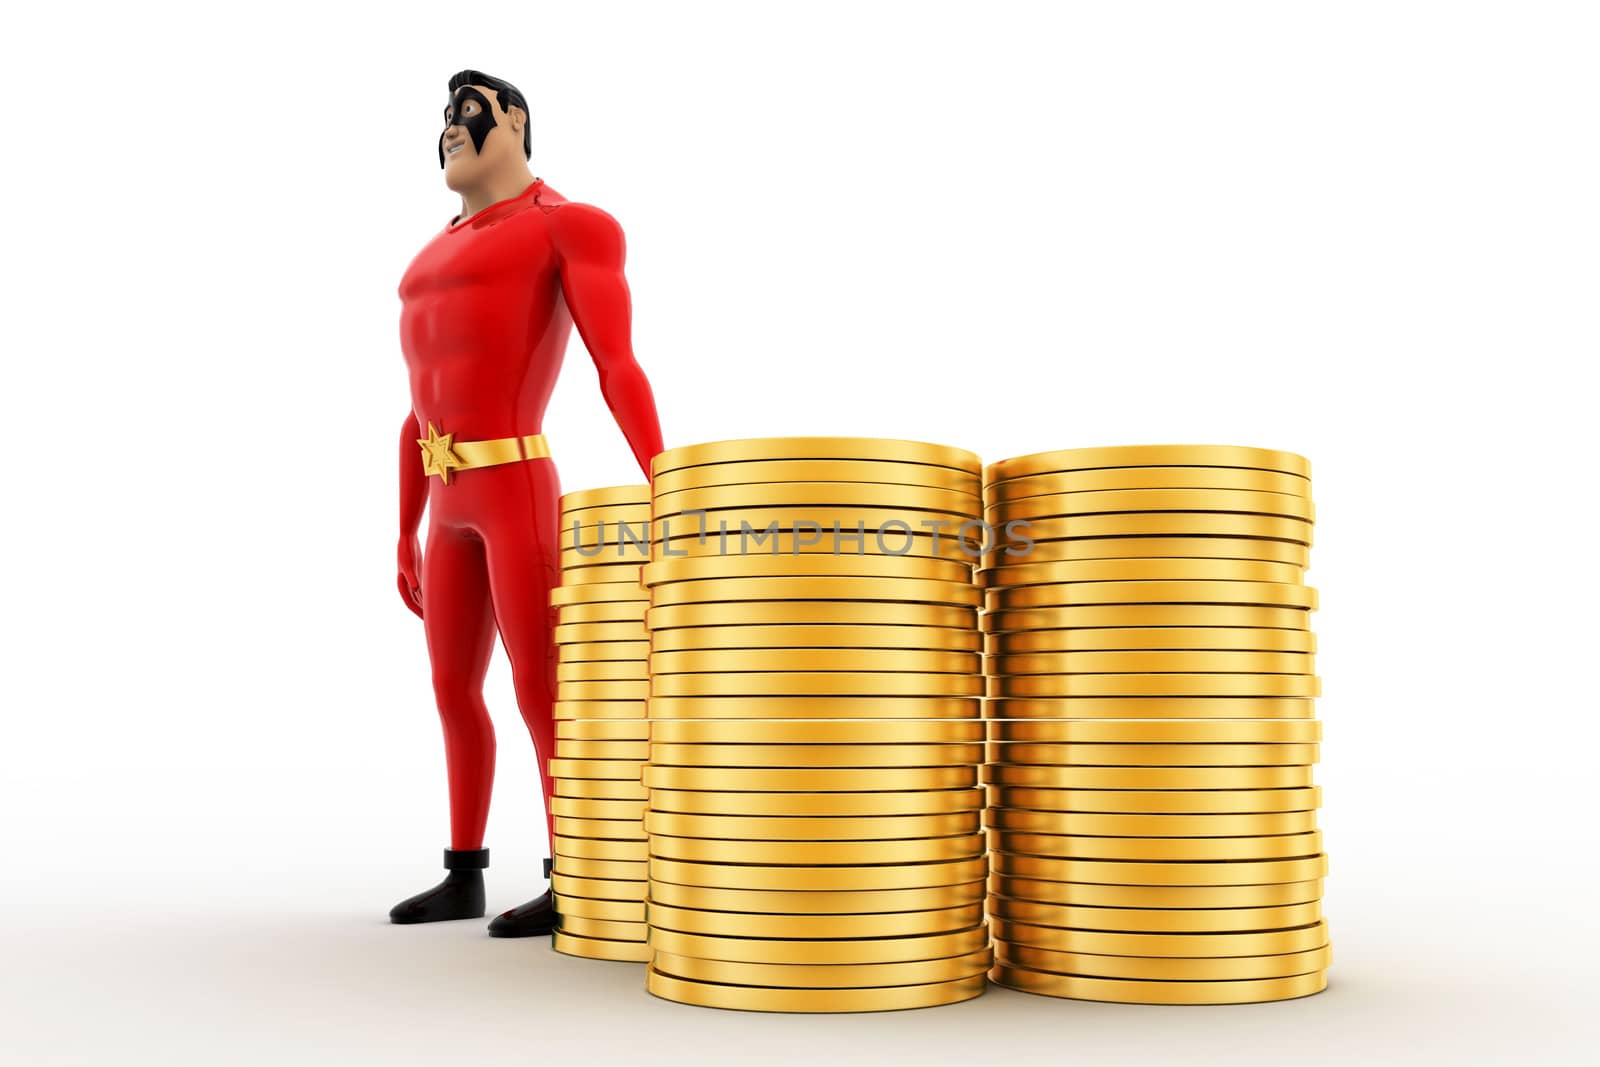 3d superhero with pile of coins concept by touchmenithin@gmail.com